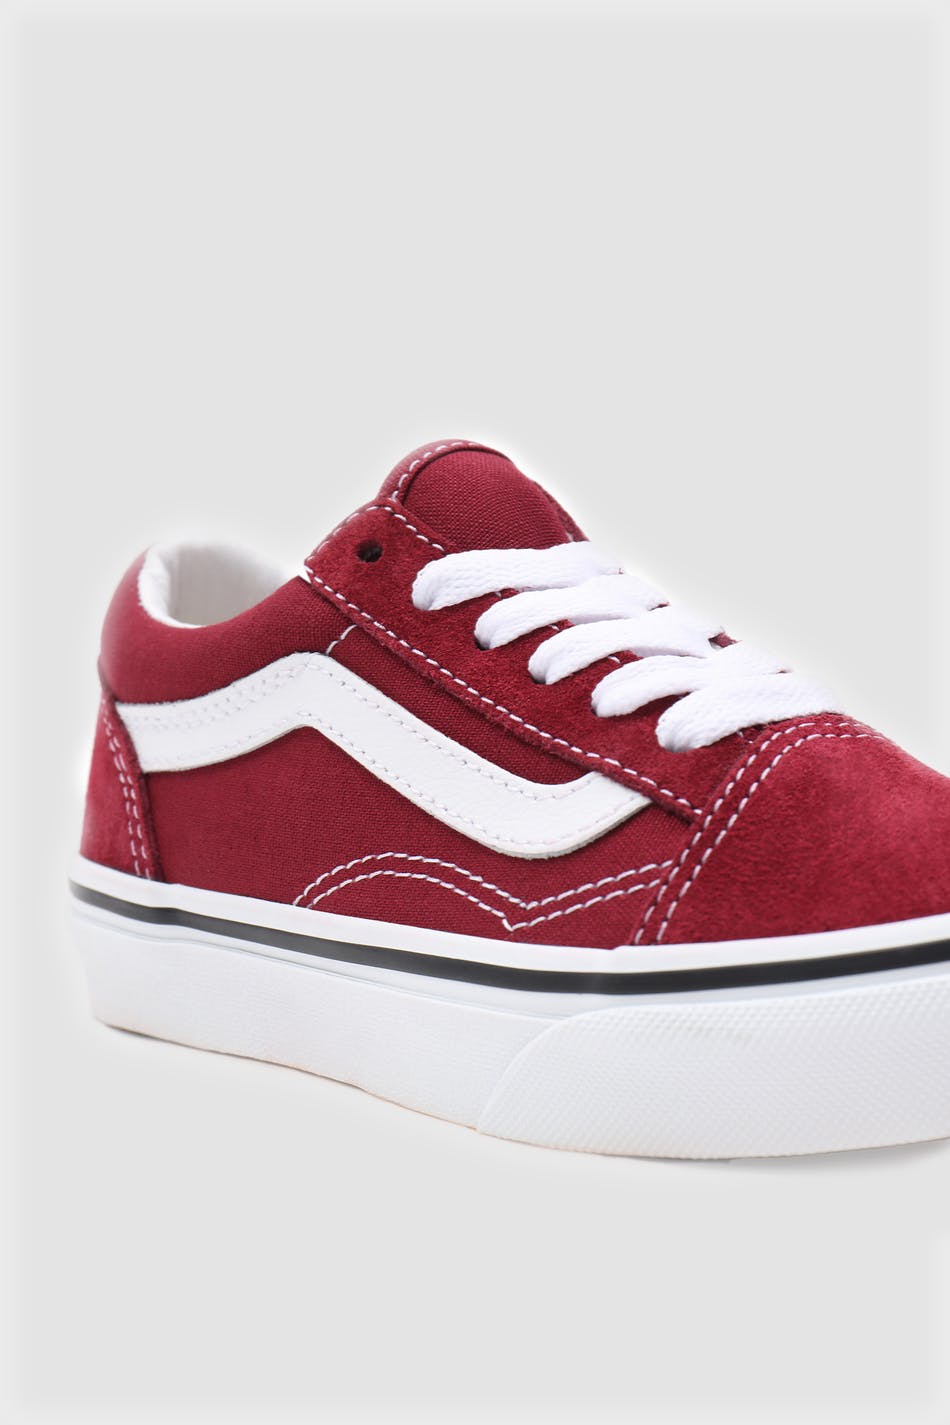 Jn old Red - Tricot skool Gina sneakers 